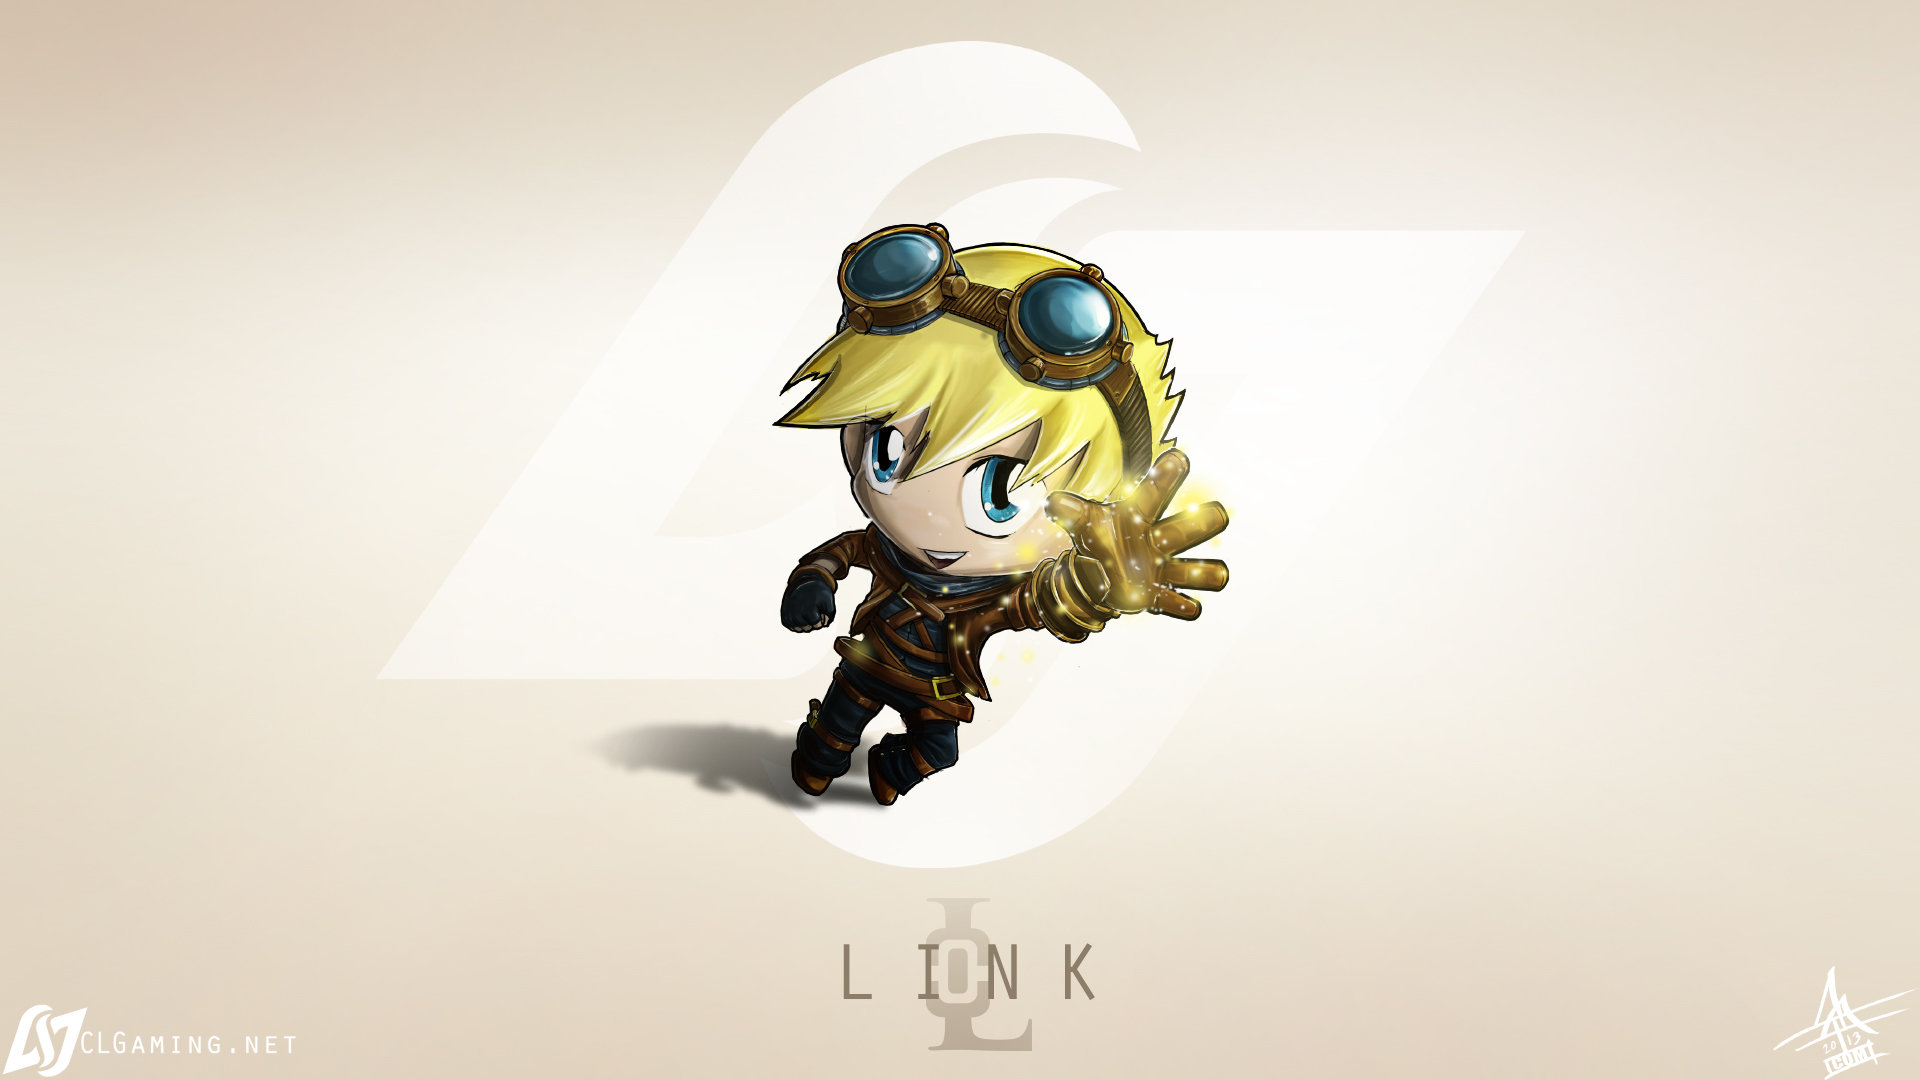 Download full hd 1920x1080 Ezreal (League Of Legends) desktop background ID:173964 for free